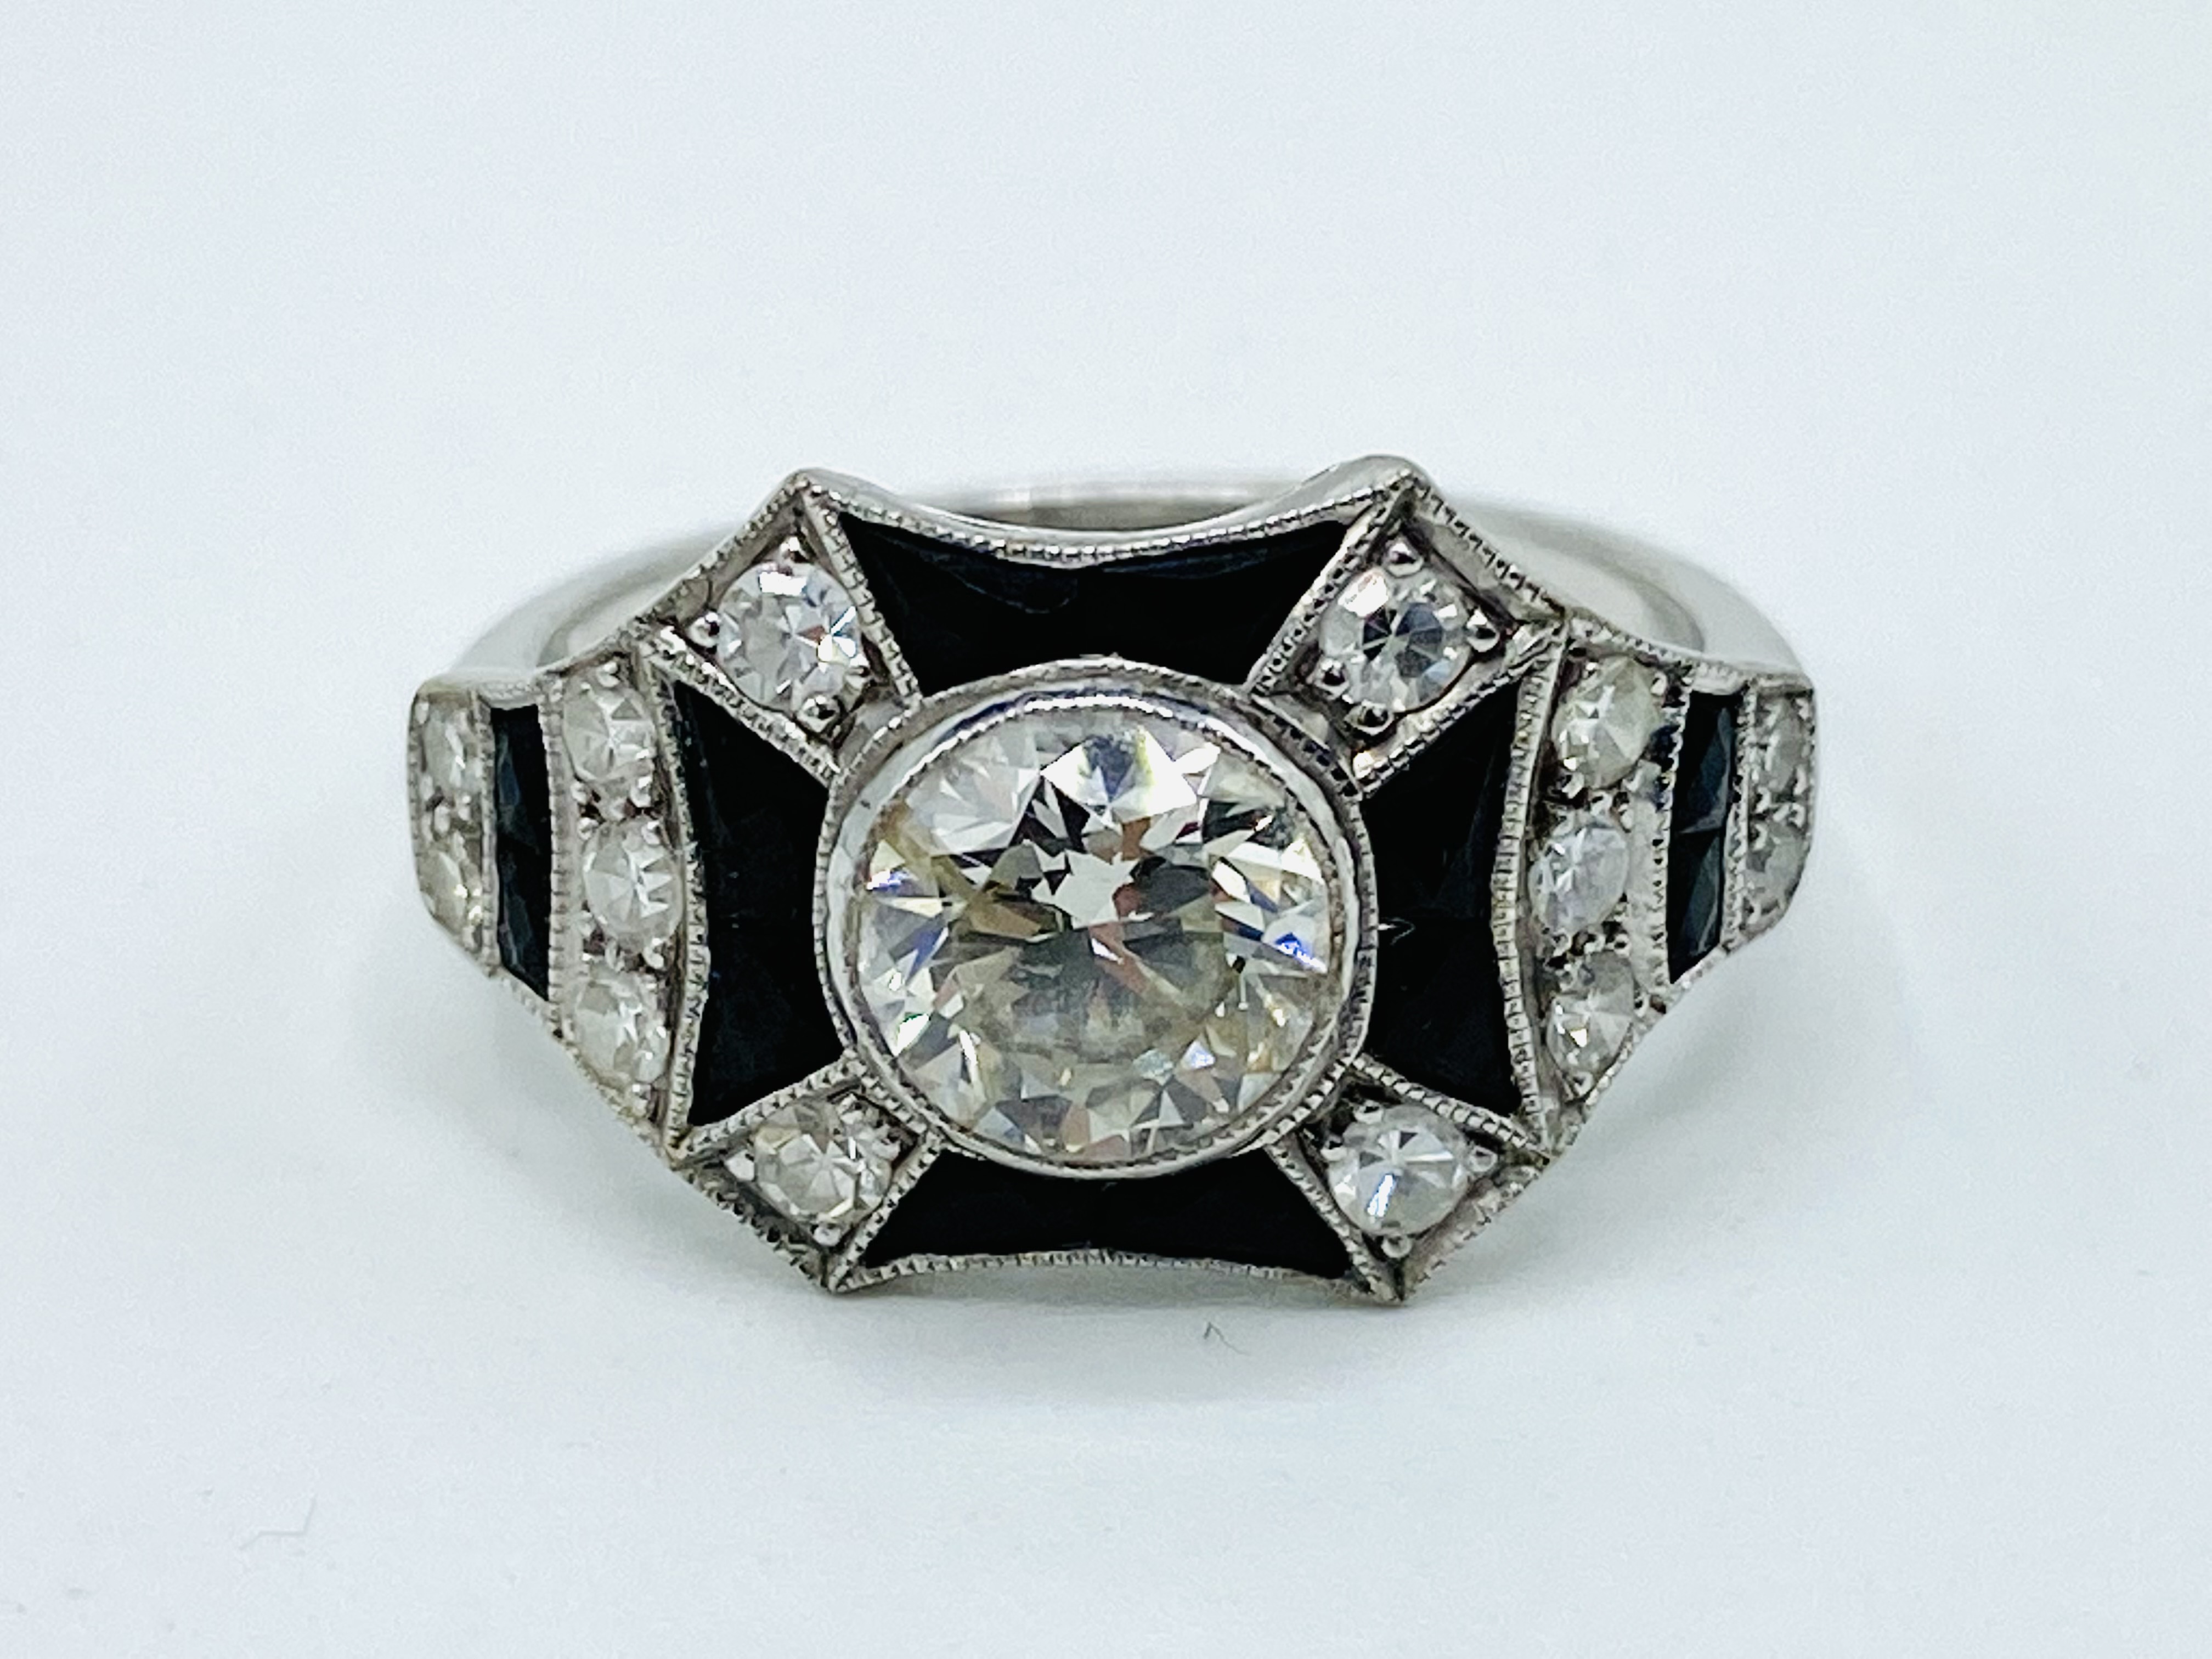 18ct white gold, diamond and black onyx ring - Image 2 of 6